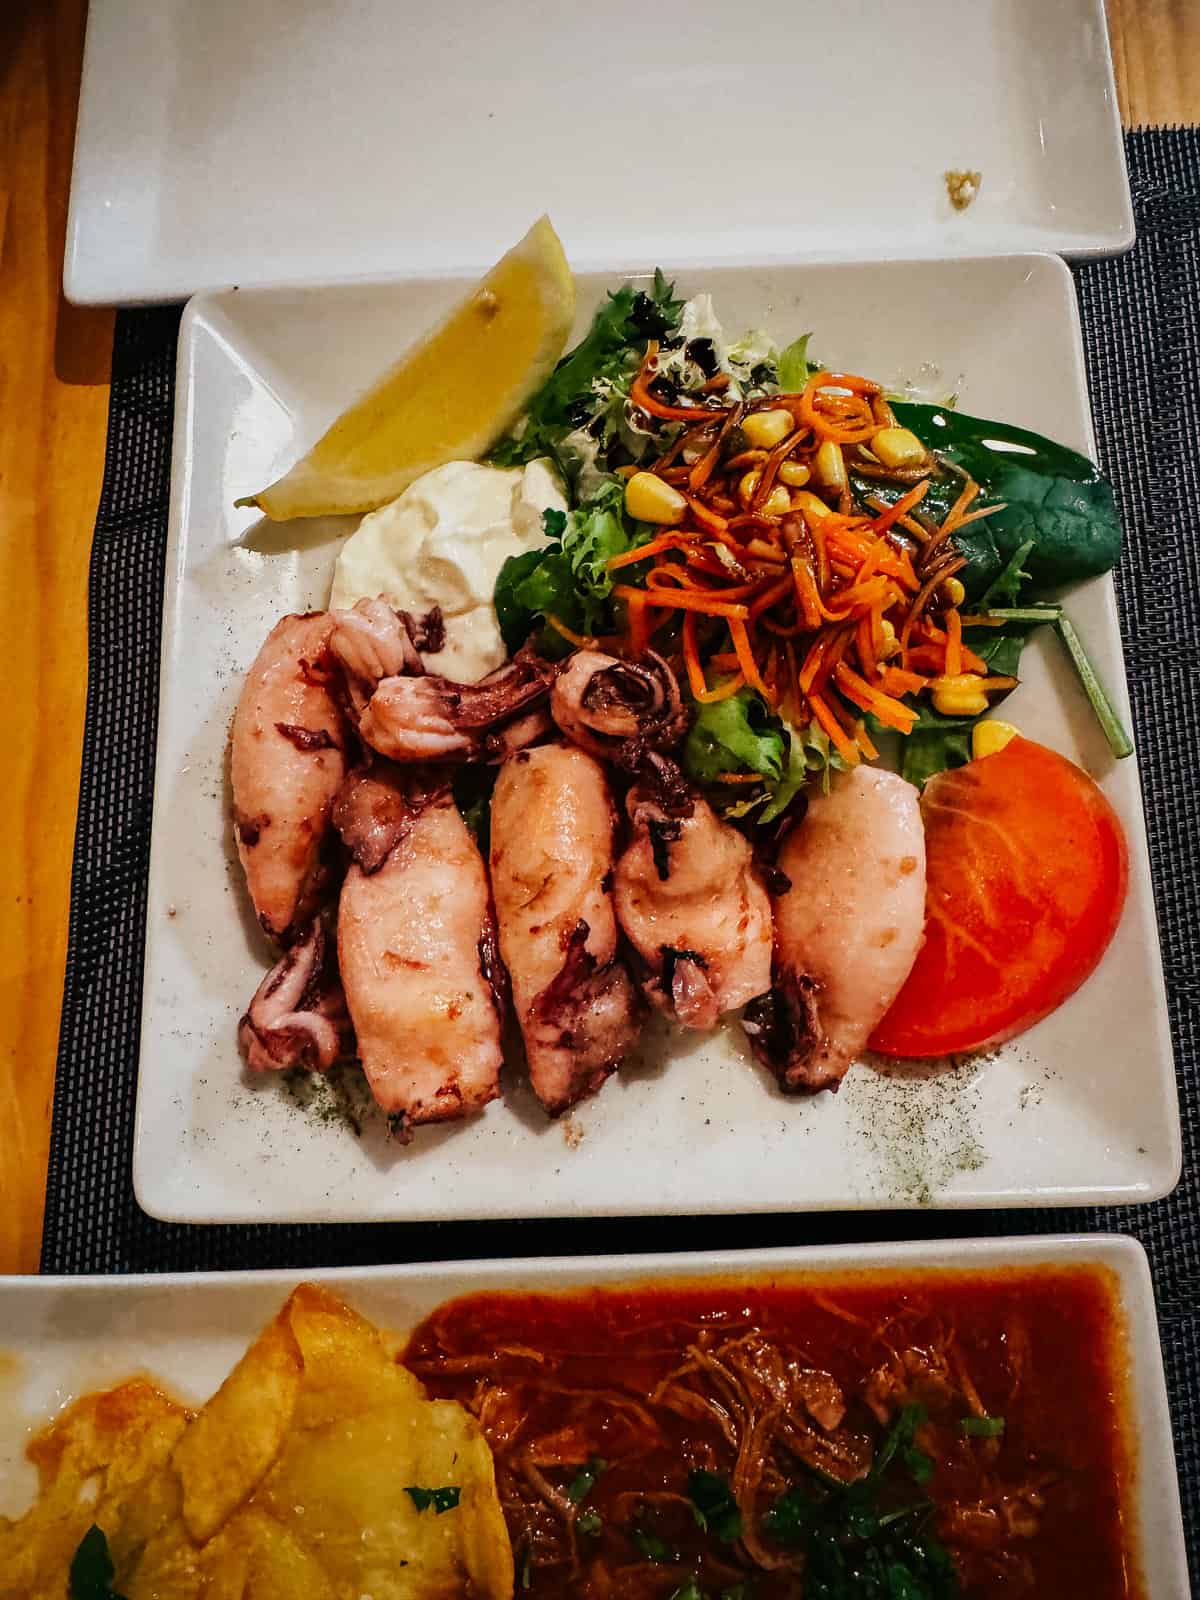 Plate of grilled calamari served with a lemon wedge, aioli, and a fresh salad, accompanied by a side of 'Patatas Bravas' in a cozy setting at 'Taberna El Sur'